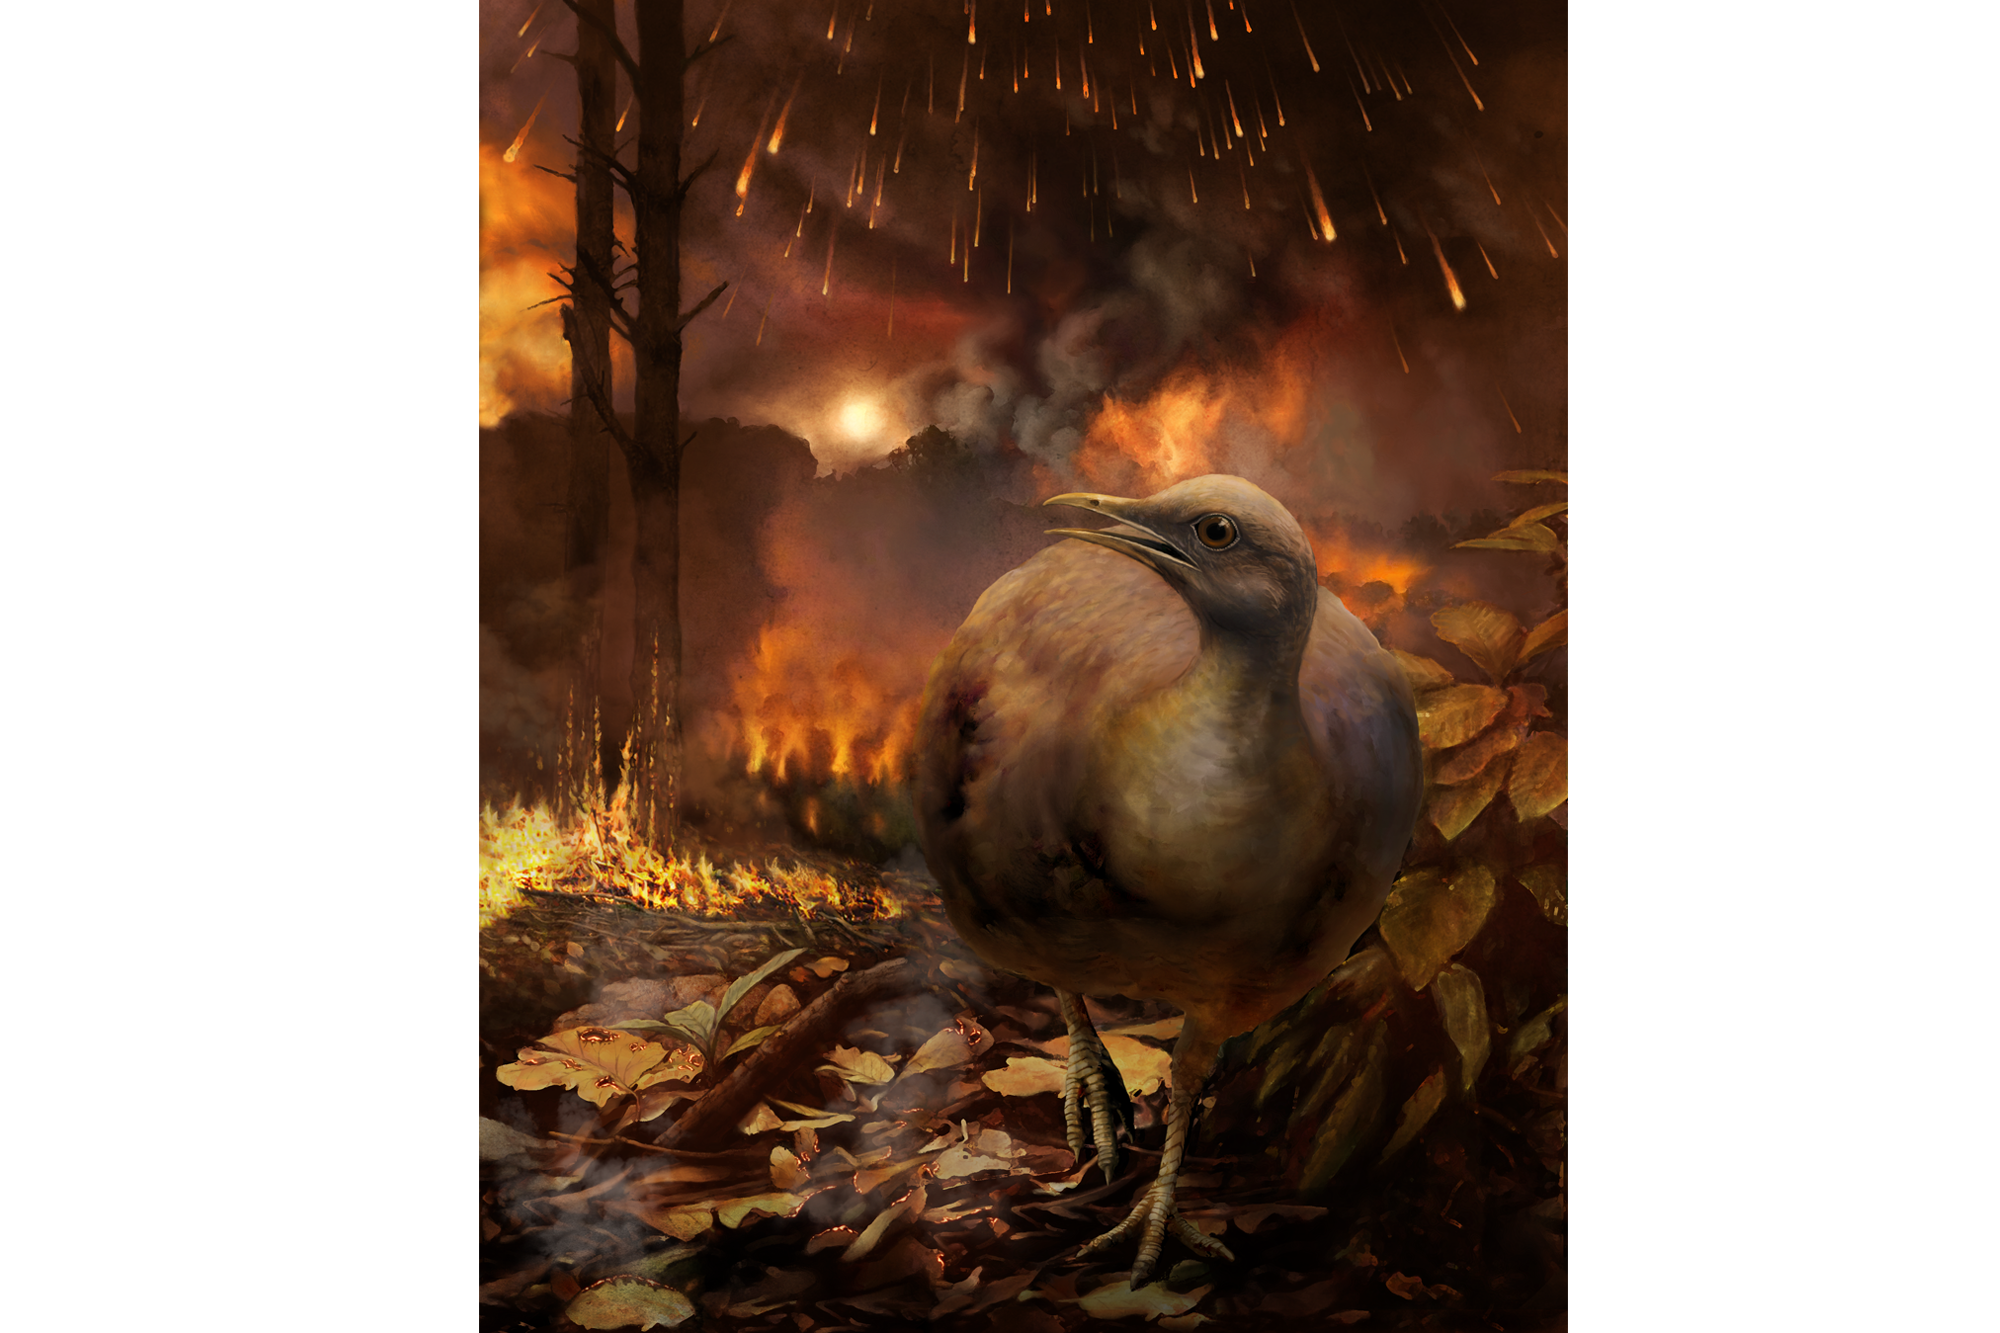 Illustration of prehistoric bird fleeing fire after an asteroid impact. Flames and smoke visible in background.